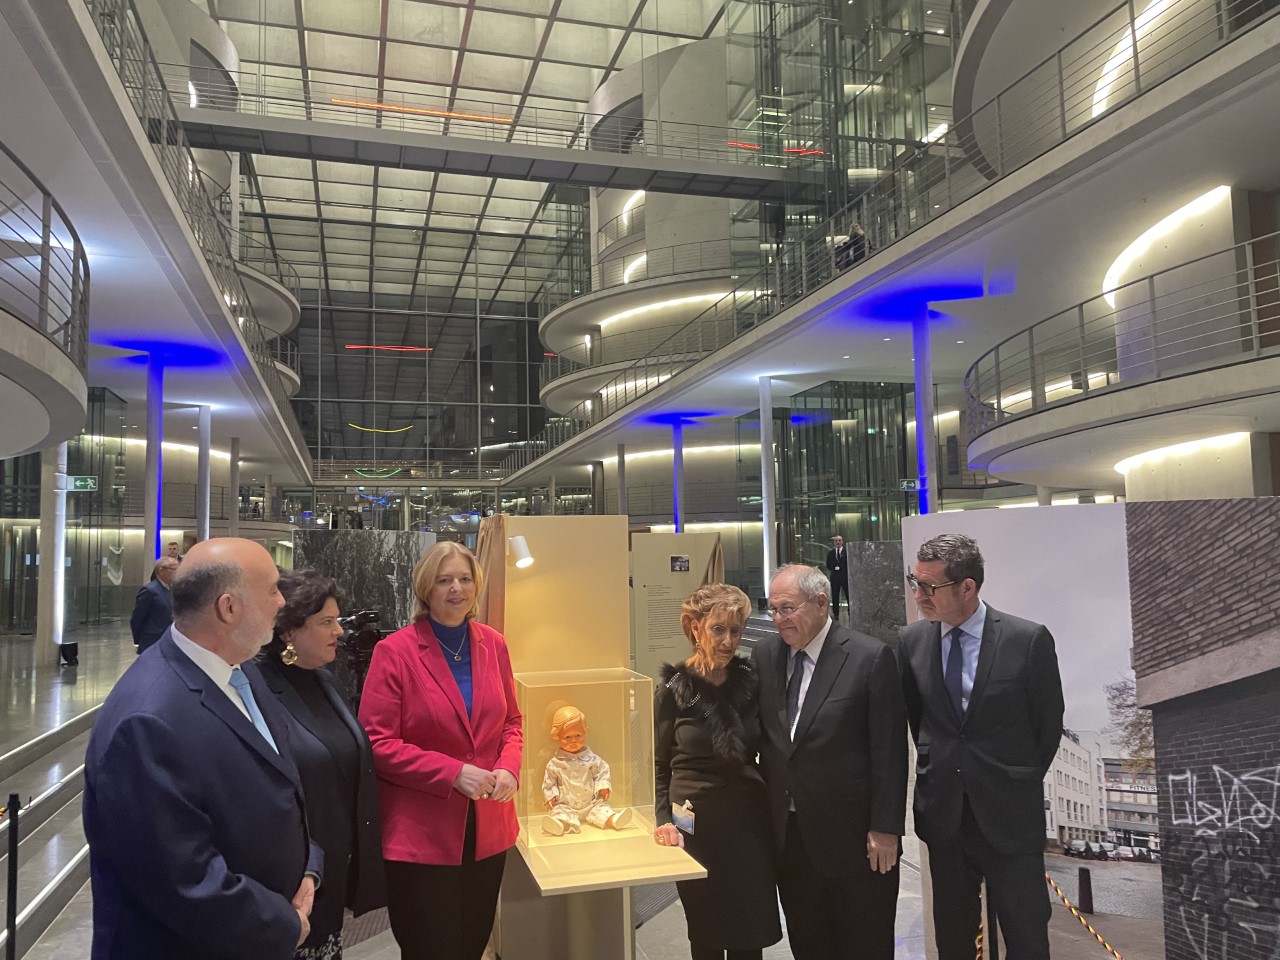 At the opening of the exhibition in the German Bundestag (from left to right): Amb. Ron Prosor, Ruth Ur, Bärbel Bas, Lore Mayerfeld (Stern), Dani Dayan, Kai Dieckmann